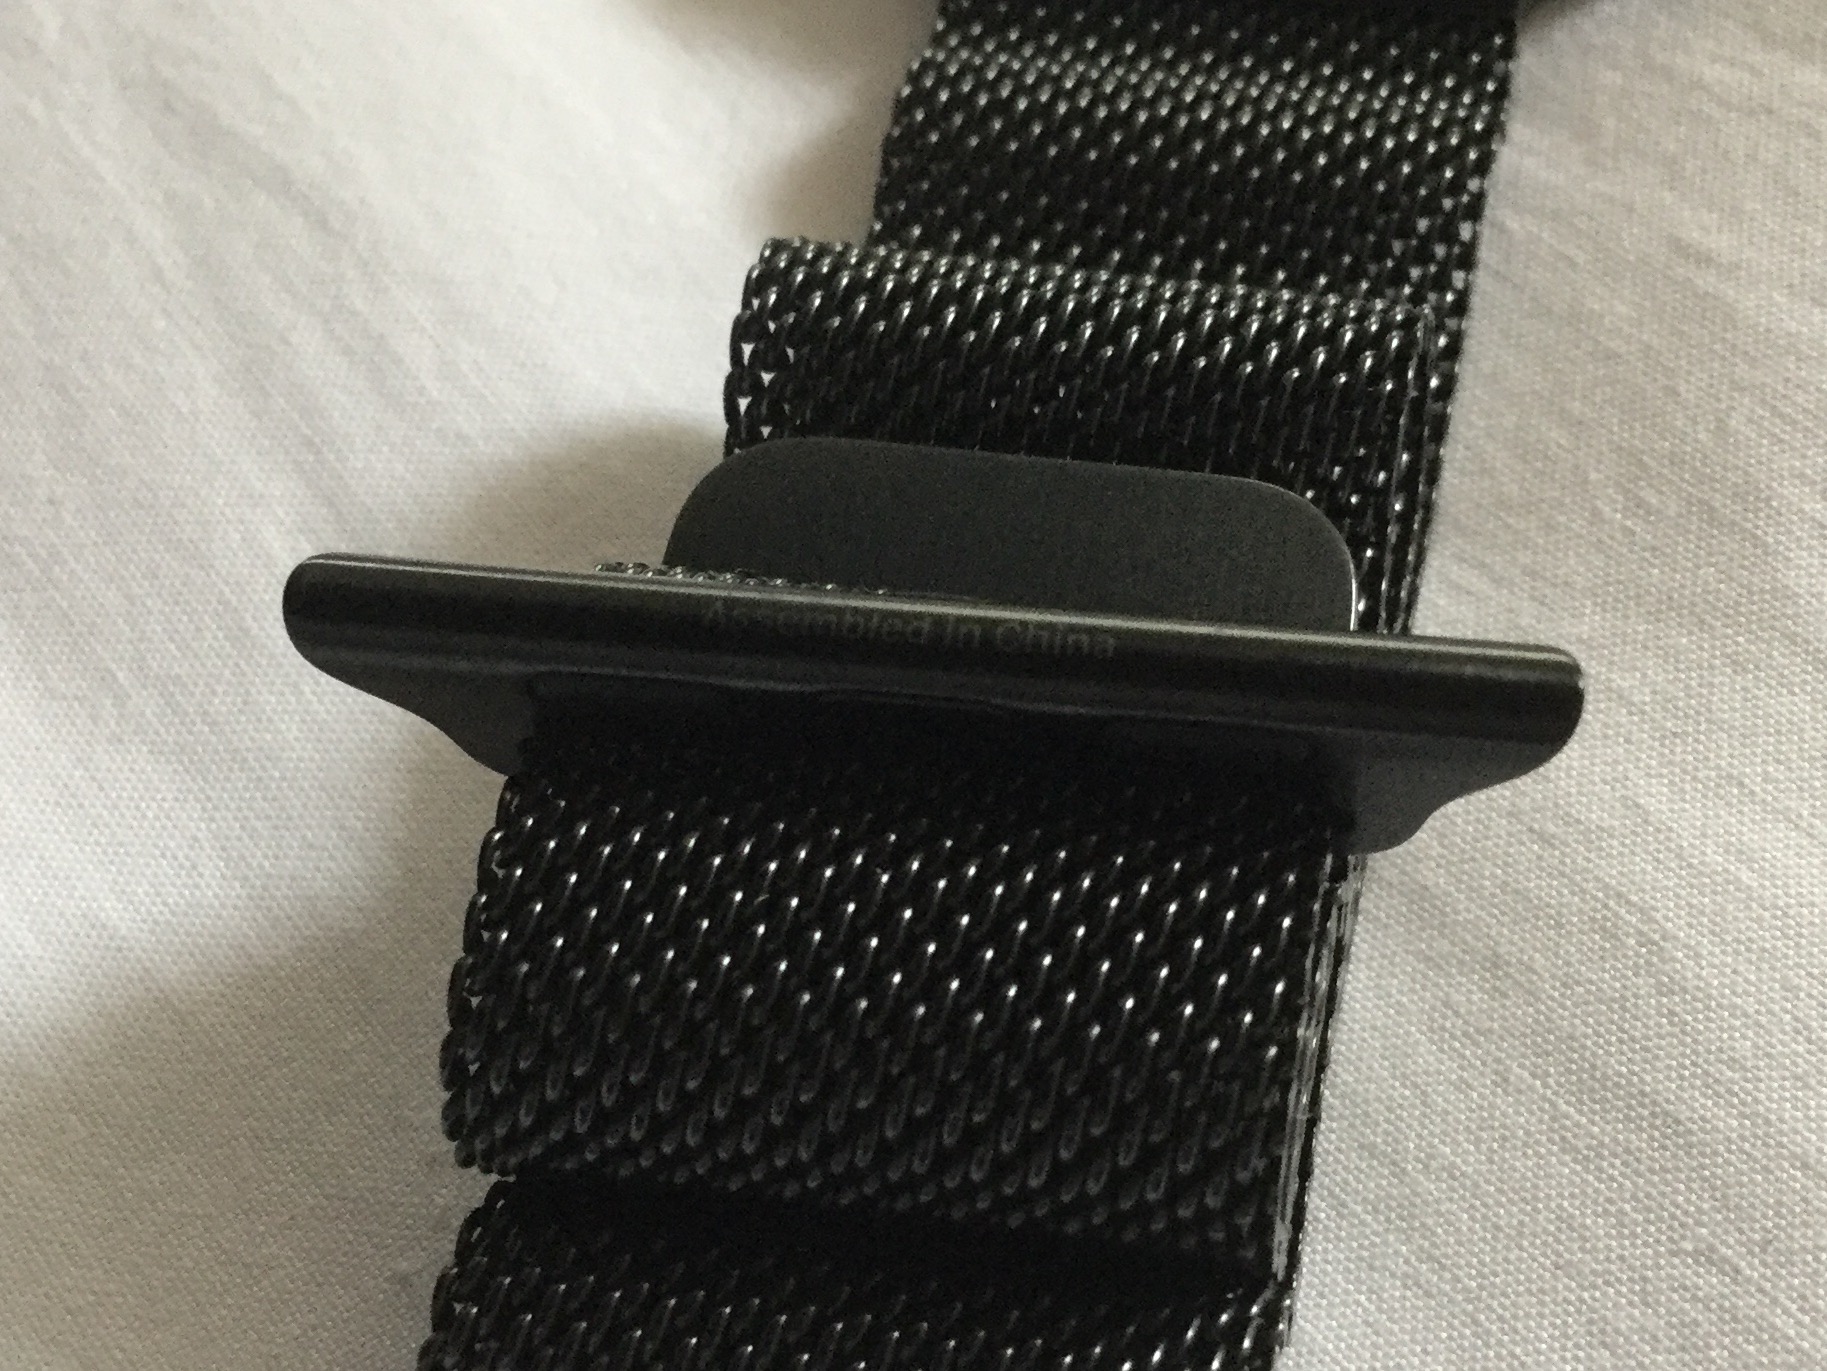 How to tell if it is a genuine milanese loop? | MacRumors Forums